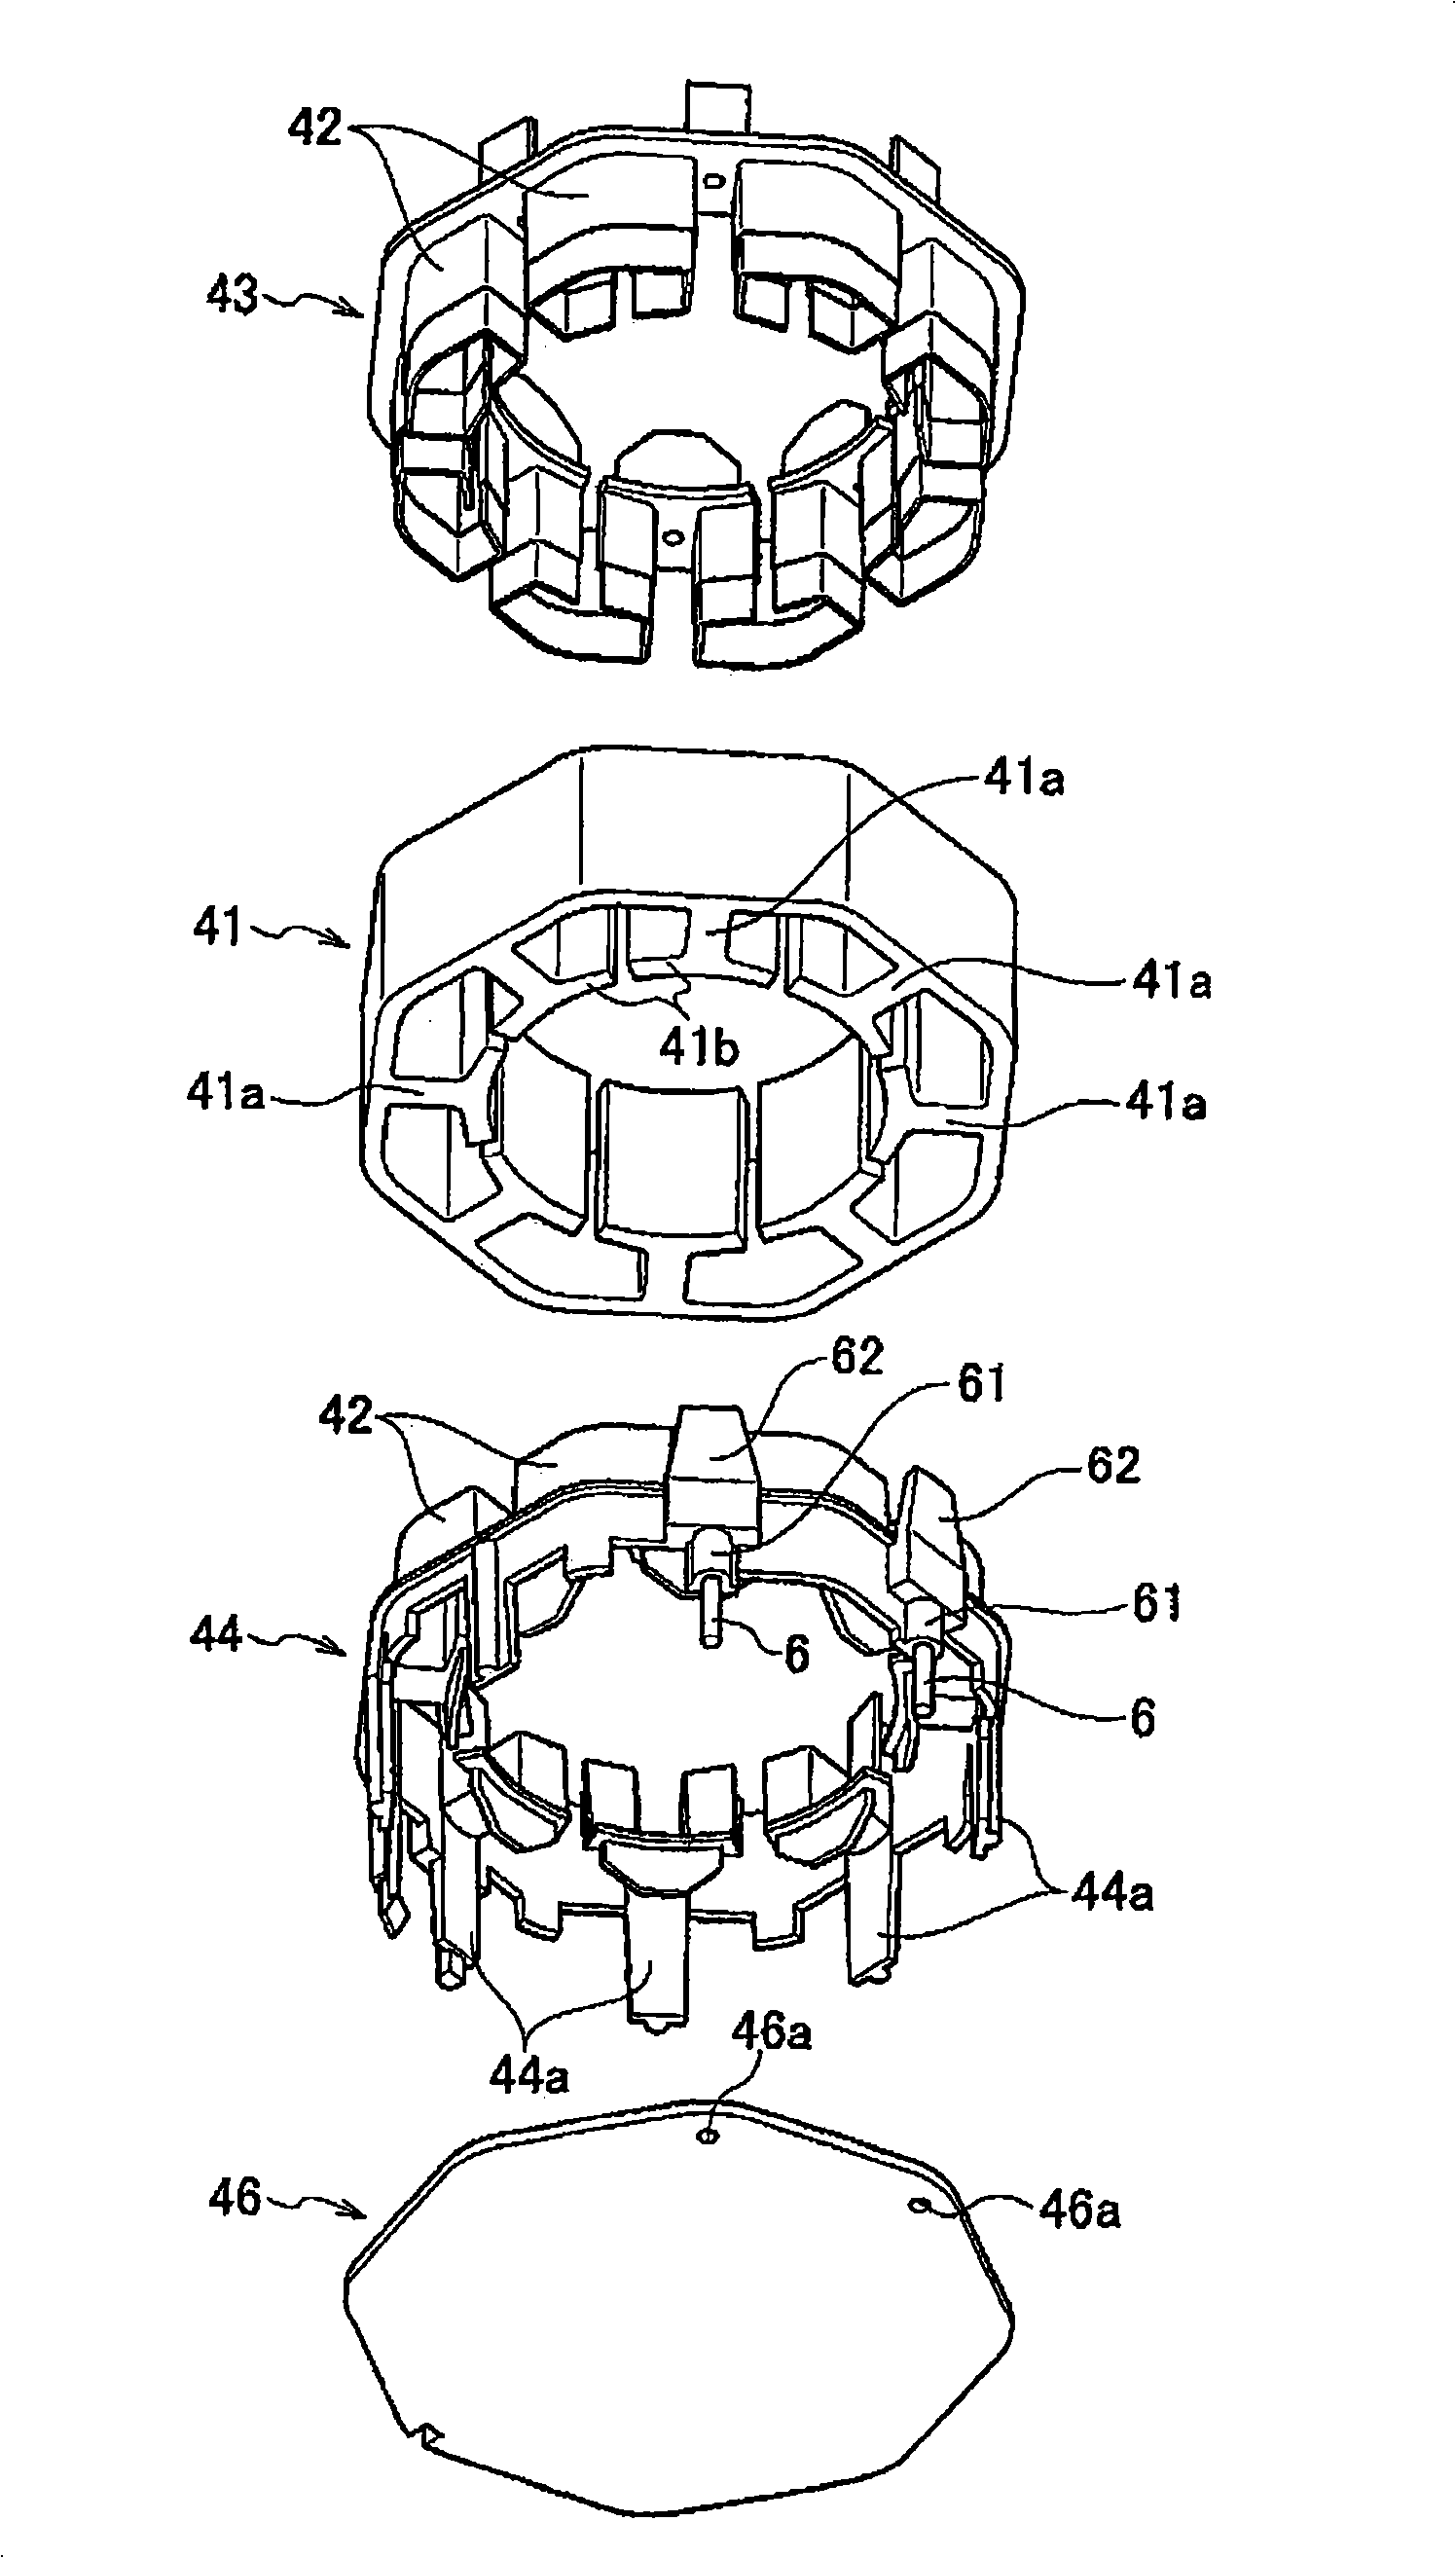 Motor and motor integrated pump with the motor